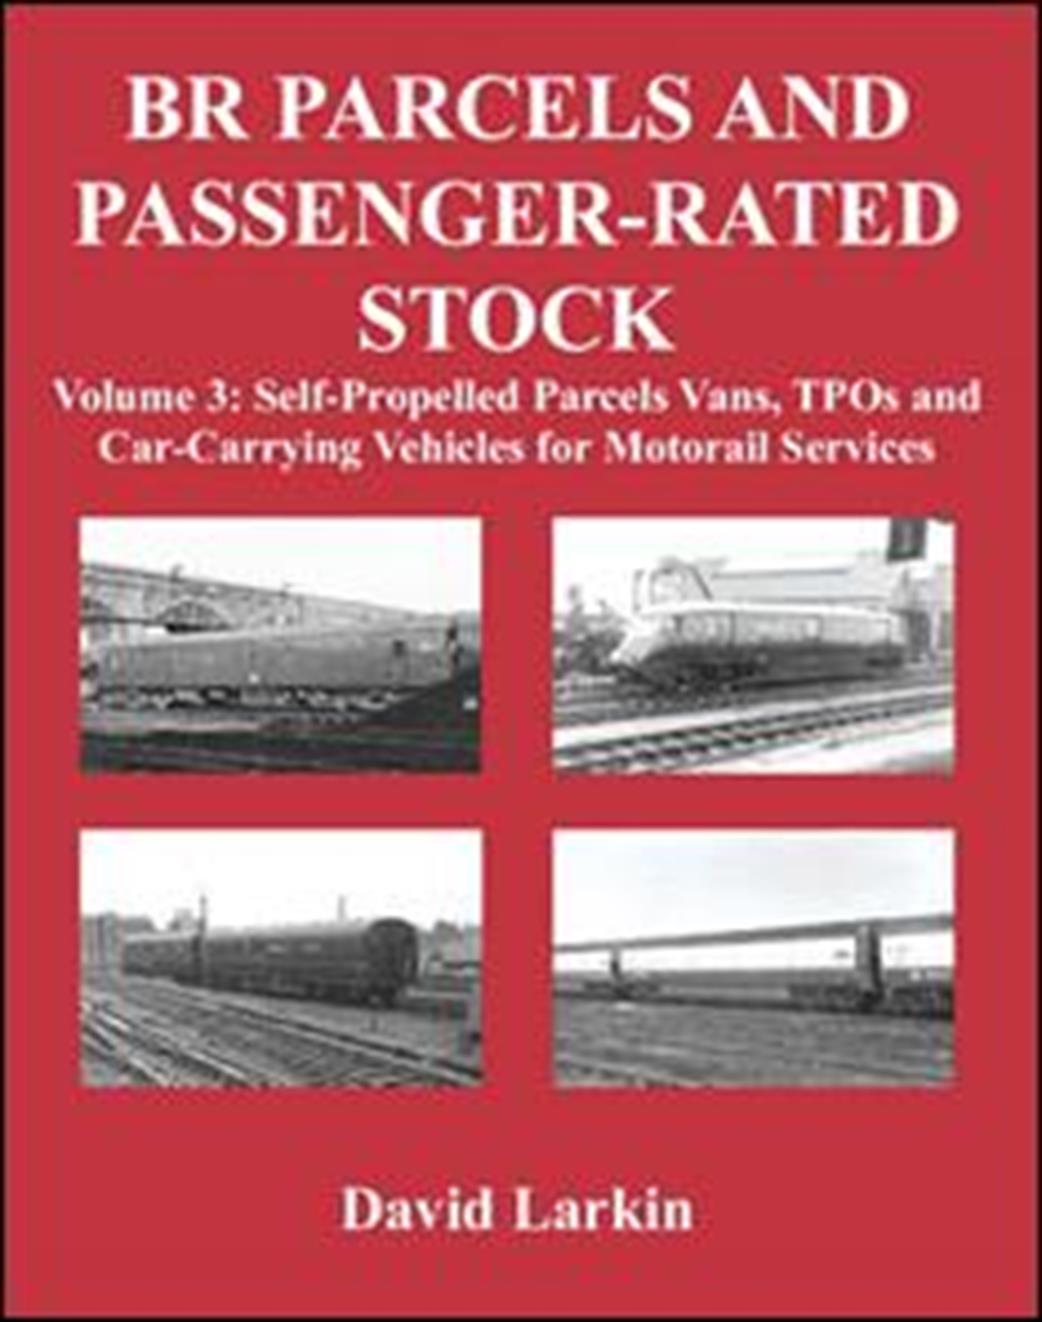 9780711037922 BR Parcels and Passenger-Rated Stock Volume 3: Self-Propelled Parcels Vans, TPOs and Car-Carrying Vehicles for Motorail Services book by David Larkin